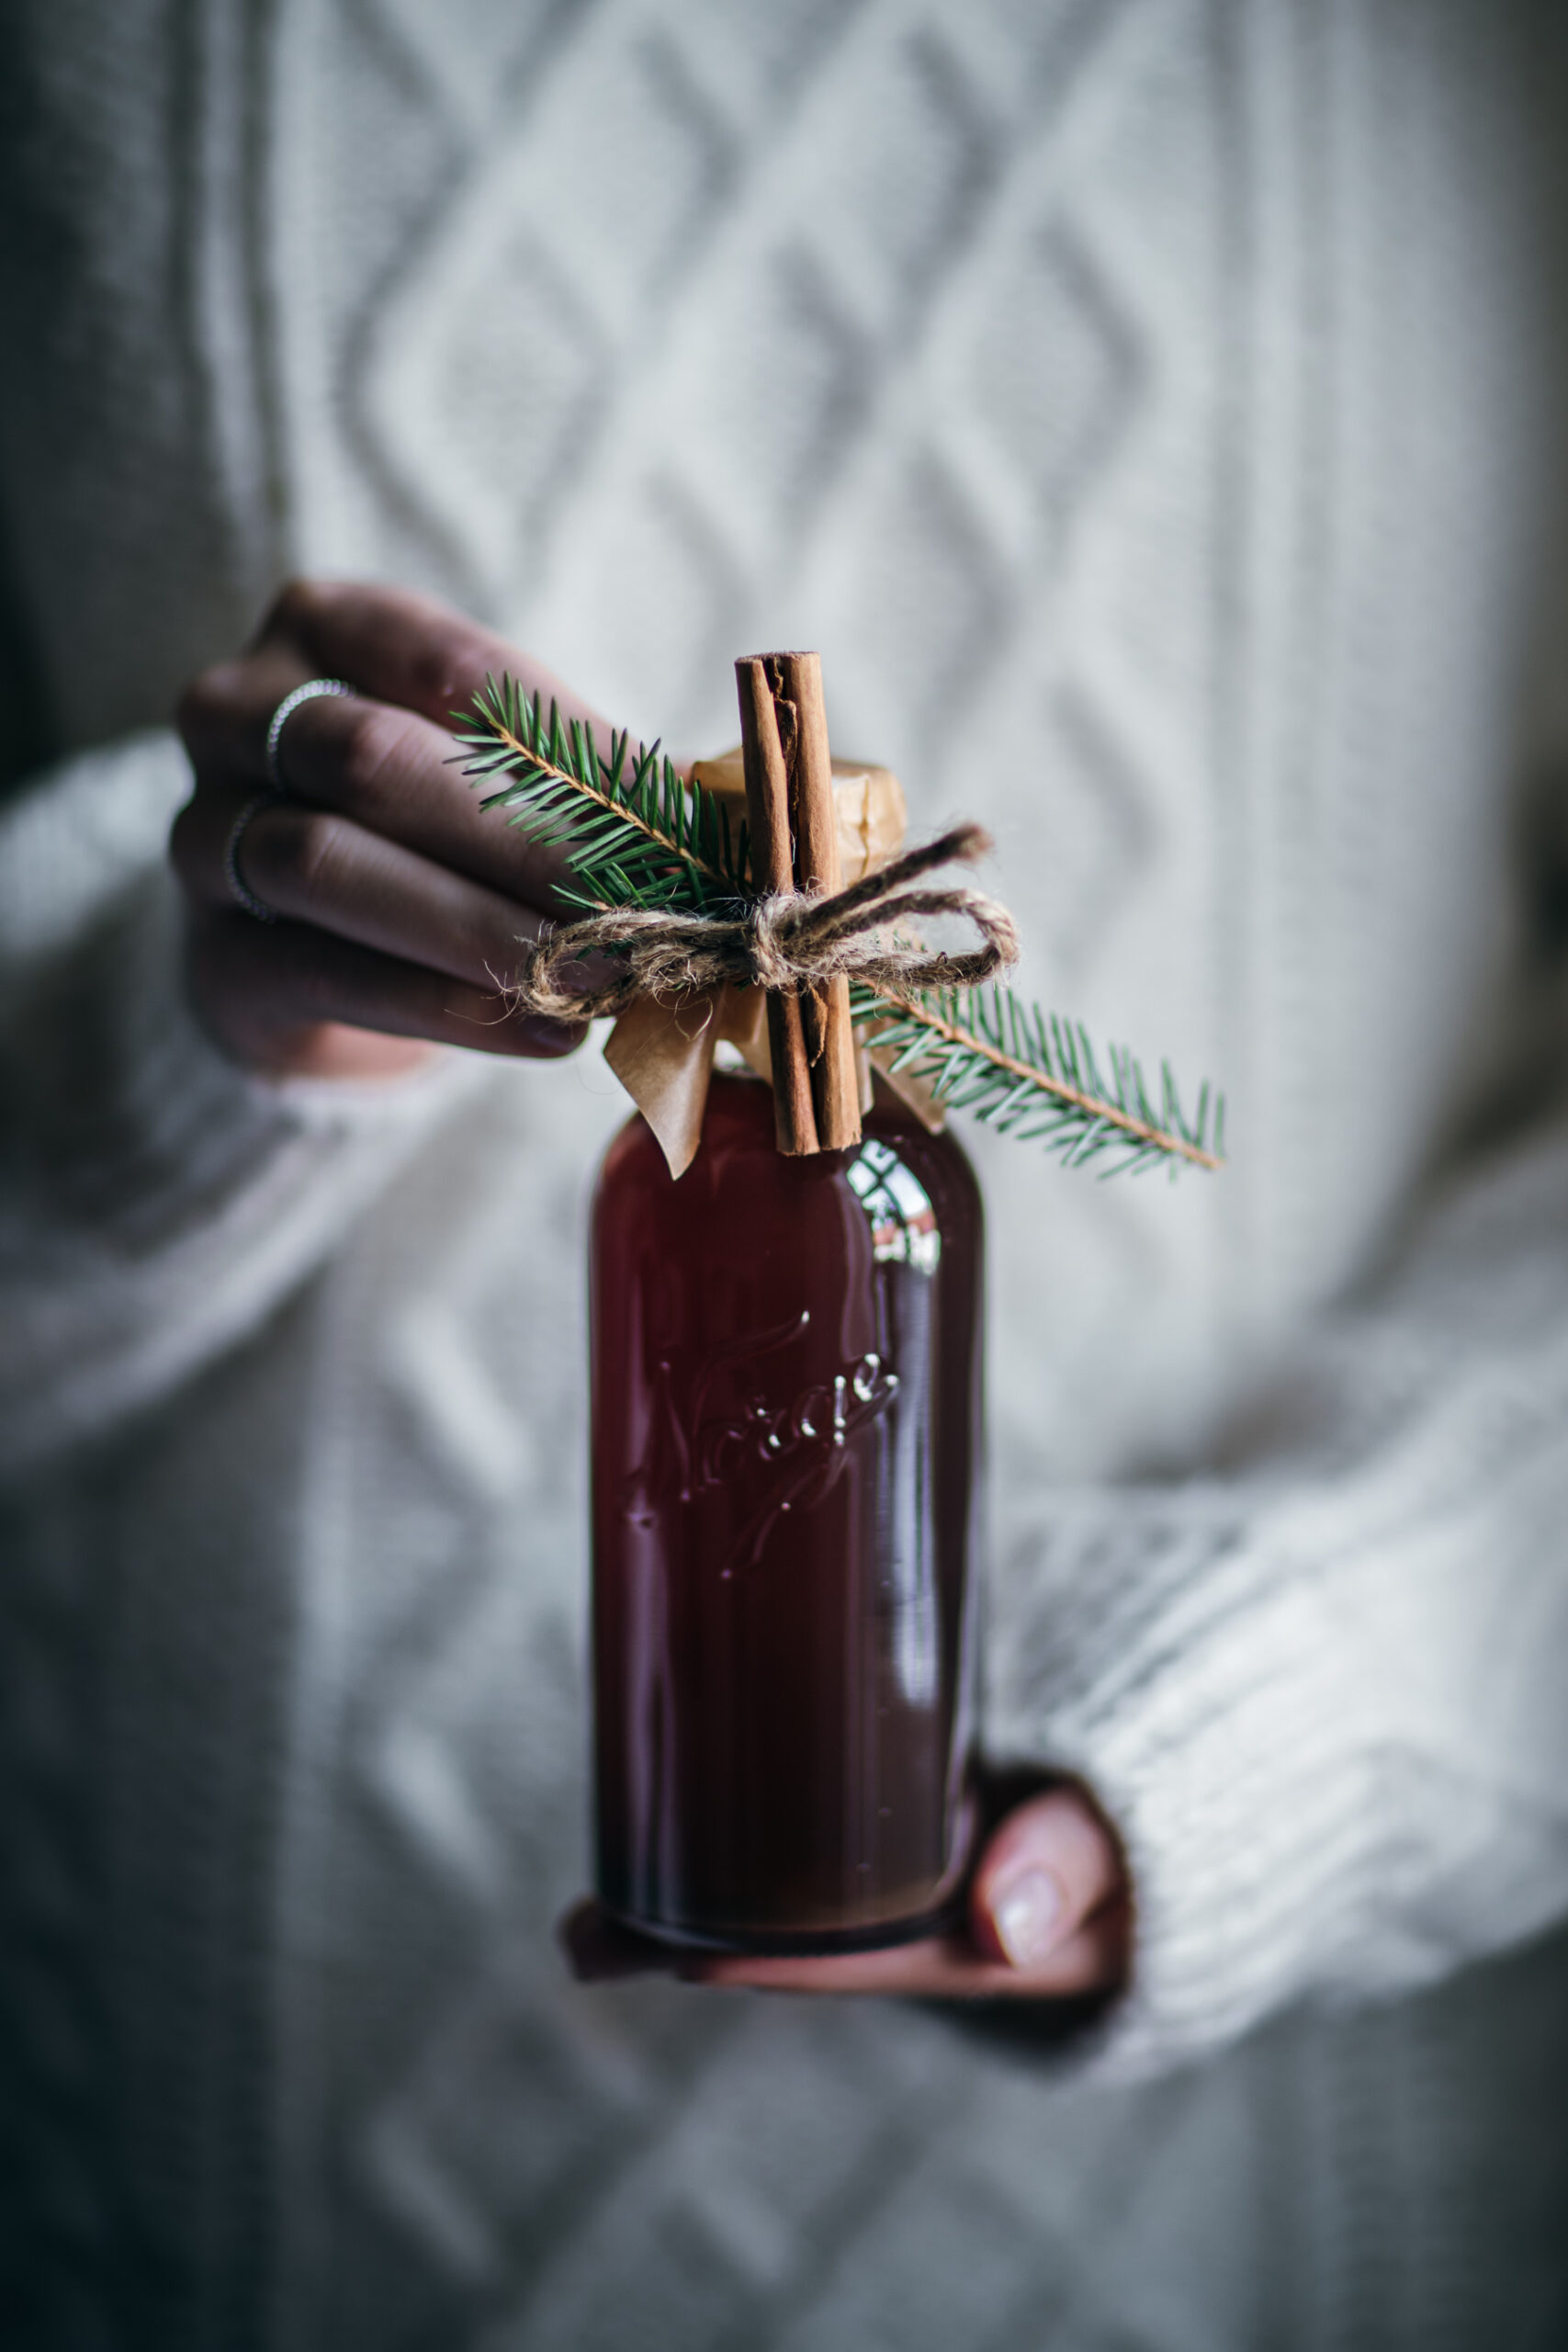 Holding a glass bottle with gingerbread syrup. Decorated with a cinnamon stick.